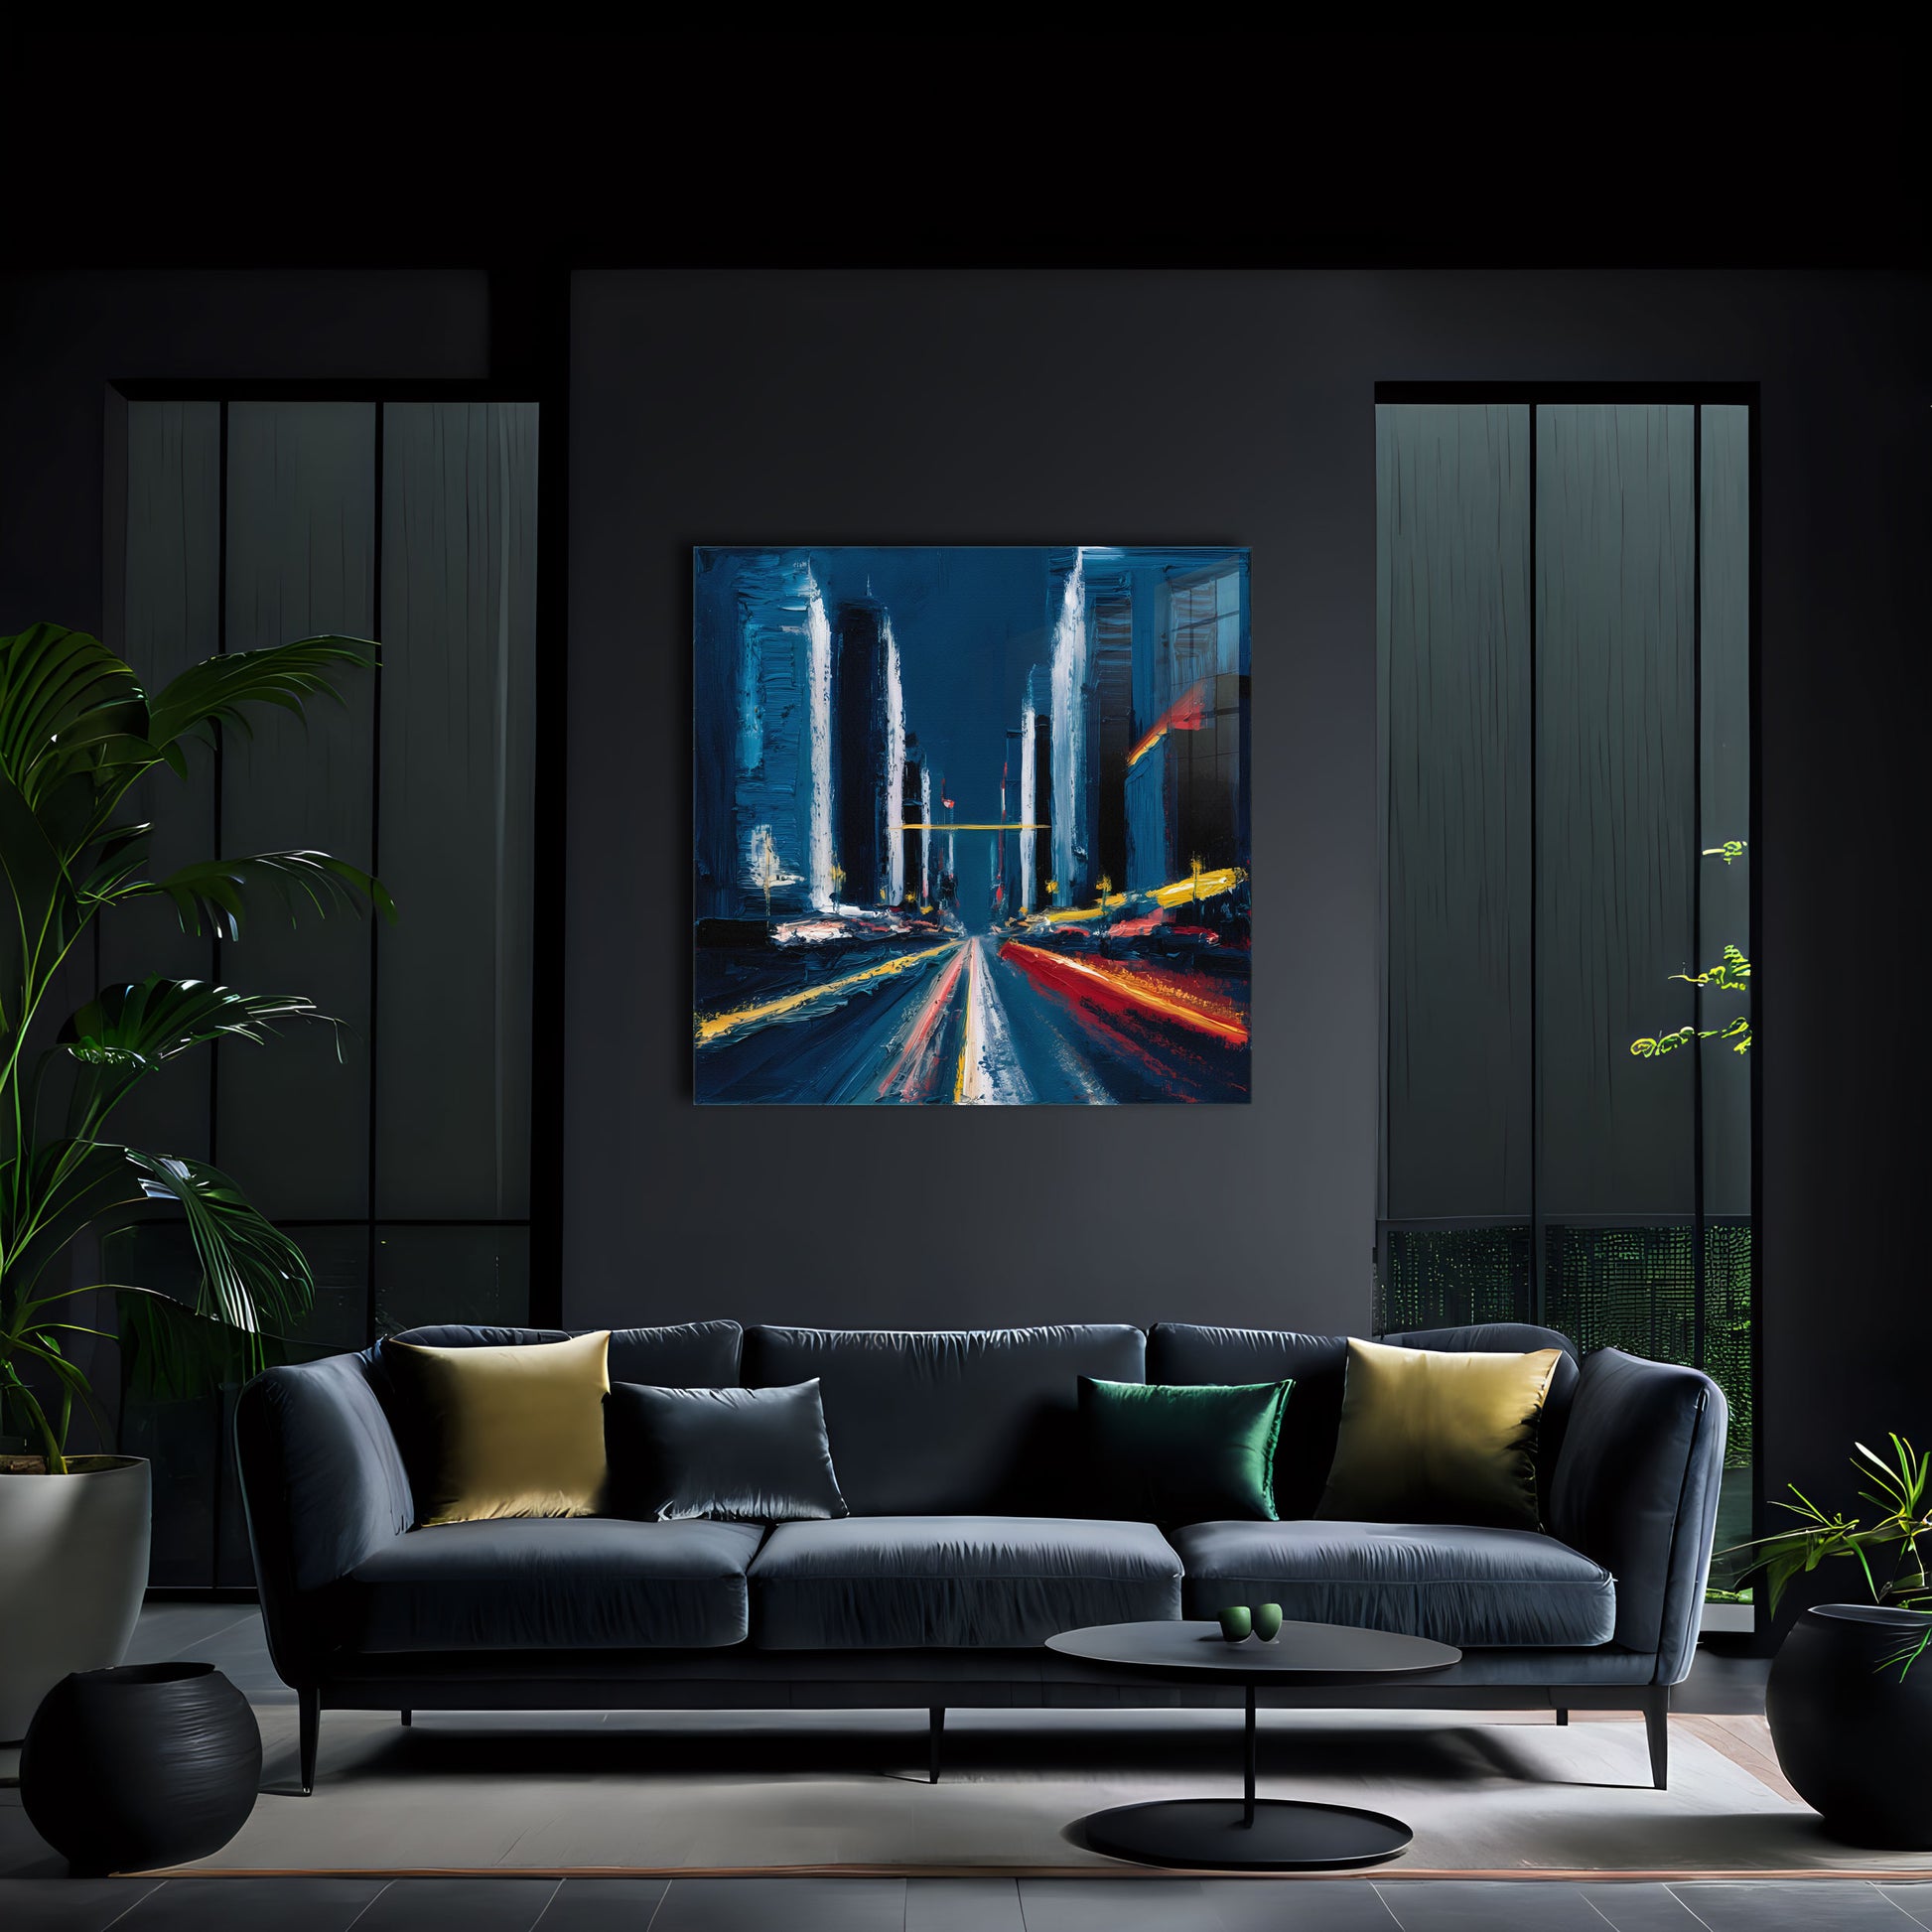 80's Nostalgia is an original and exclusive contemporary urban abstract art luxury artwork print, it's 12-colour Giclée printed, then hand mounted on to a luxury 10mm thick, high gloss acrylic panel with crystal clear diamond polished edges. On the back is an invisible floating subframe, giving a very modern and contemporary look that creates a dramatic focal point. Image 2.